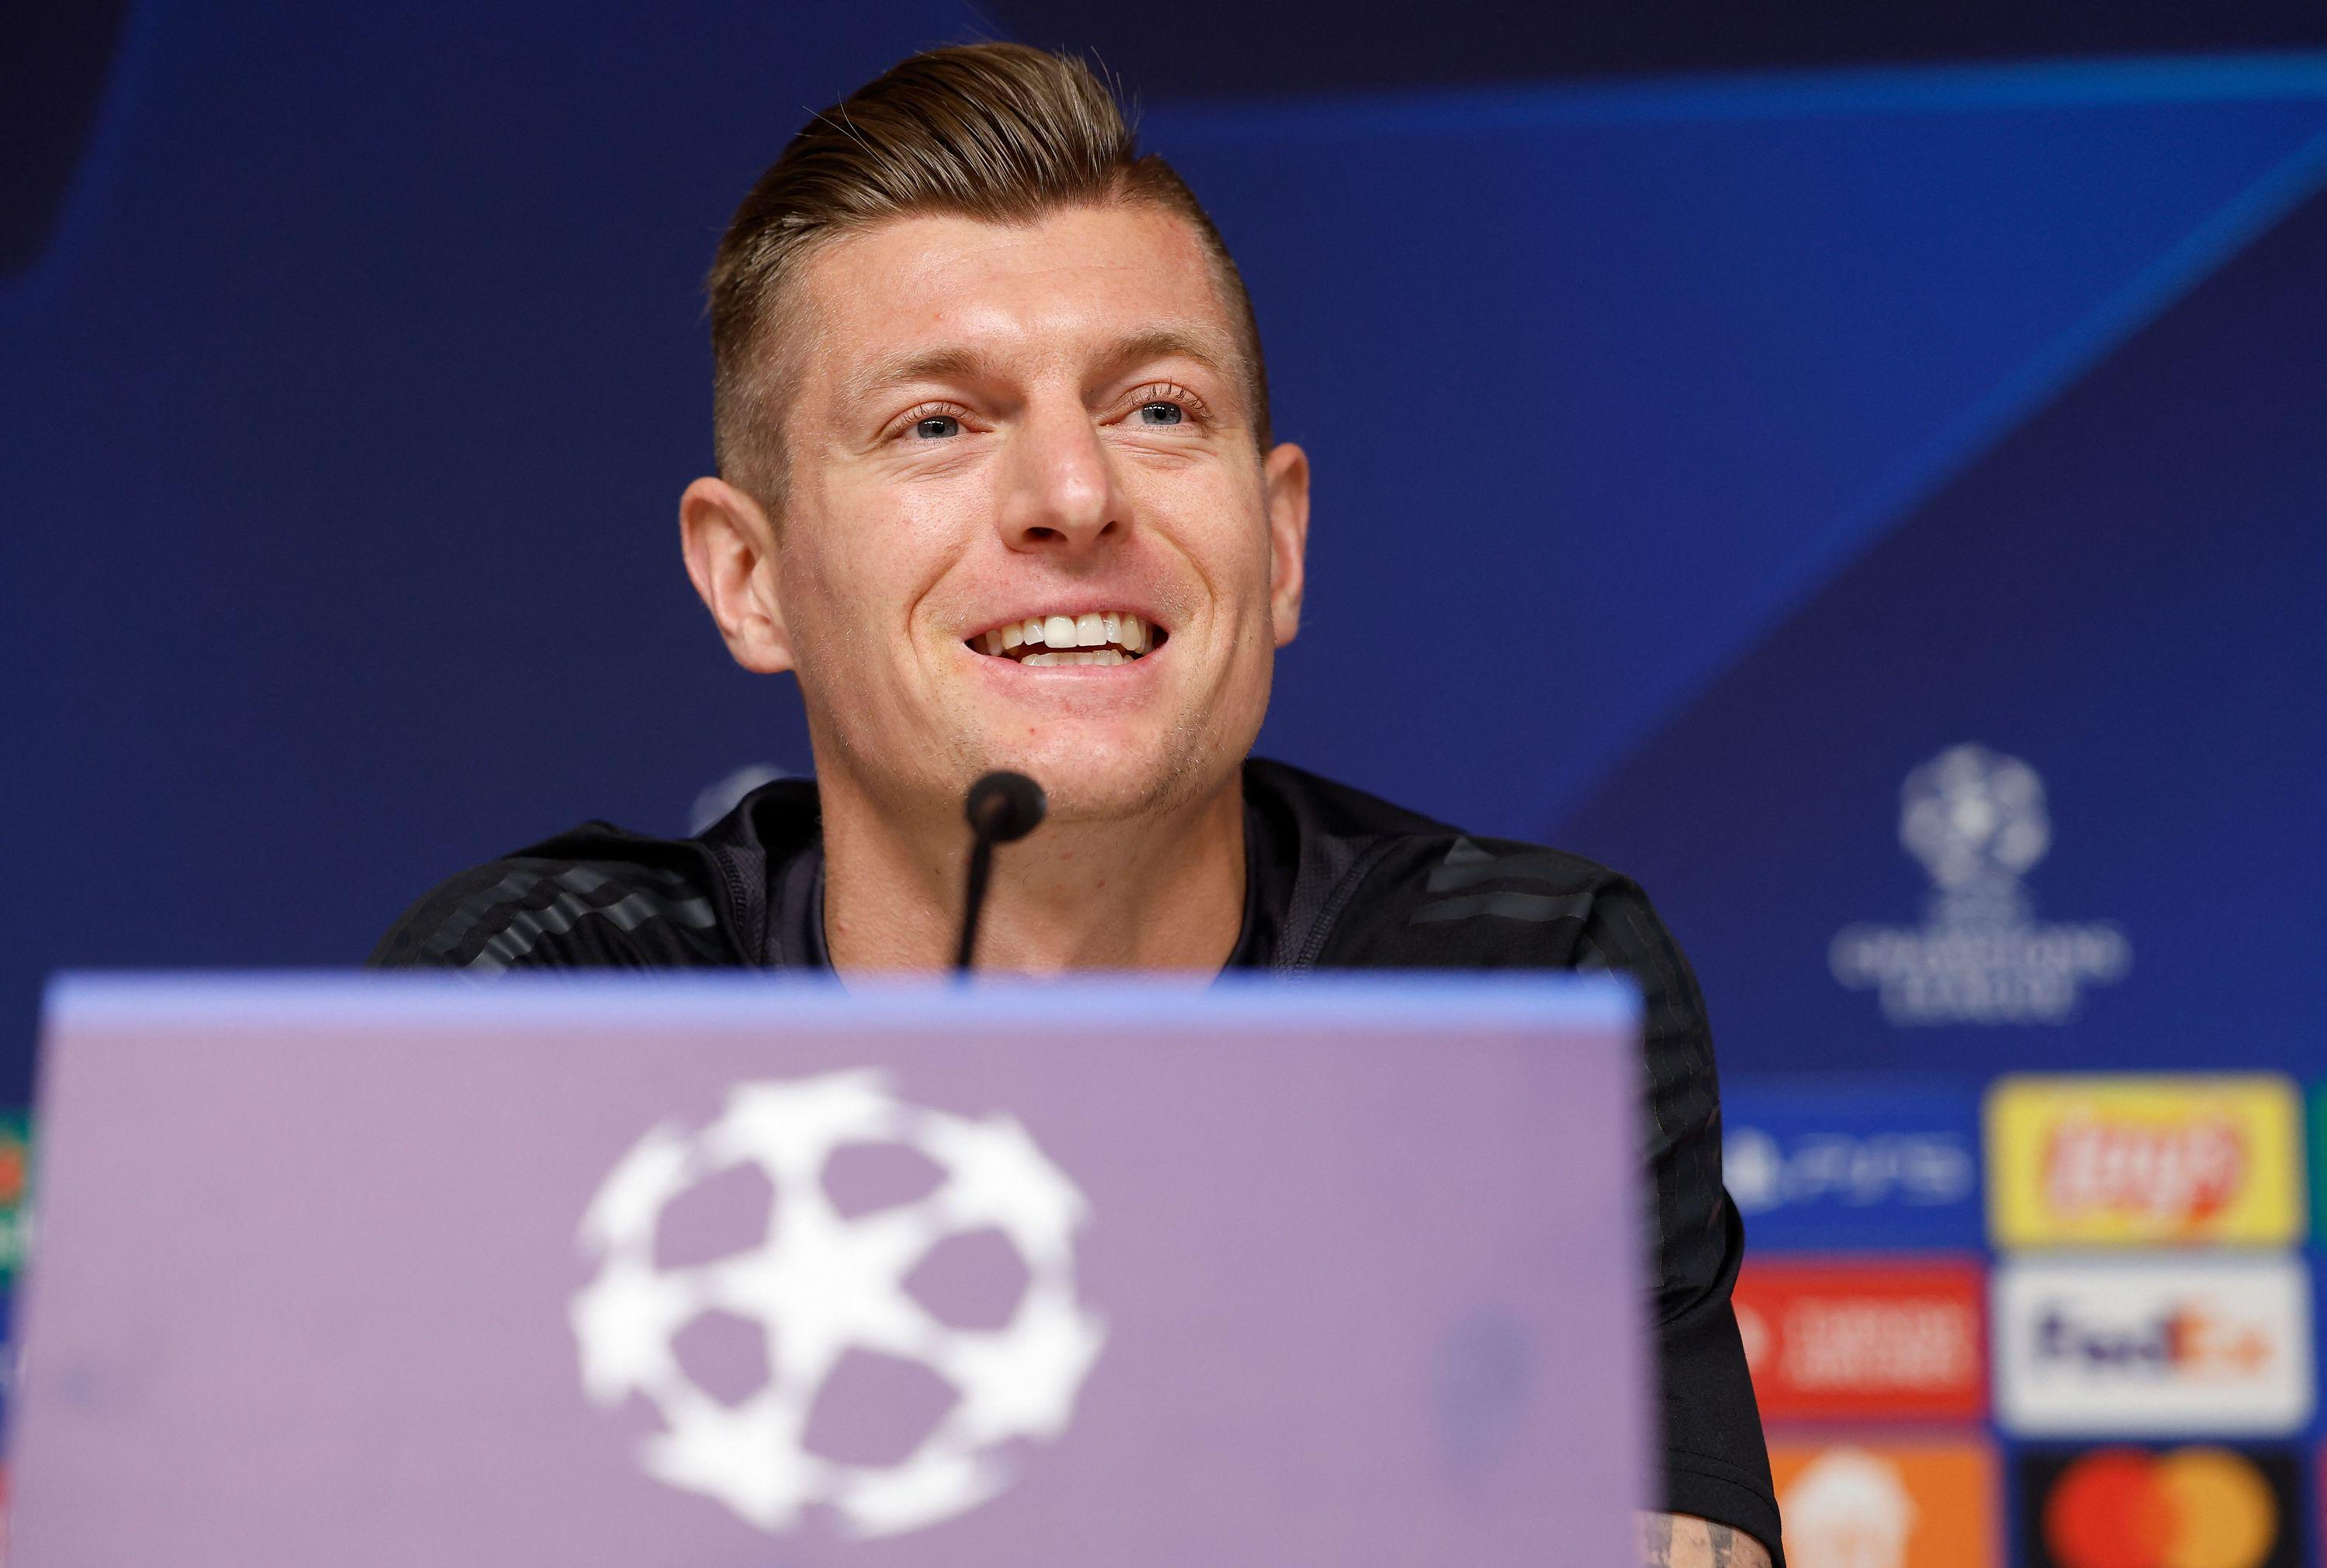 Football: Toni Kroos considers a return to the national team